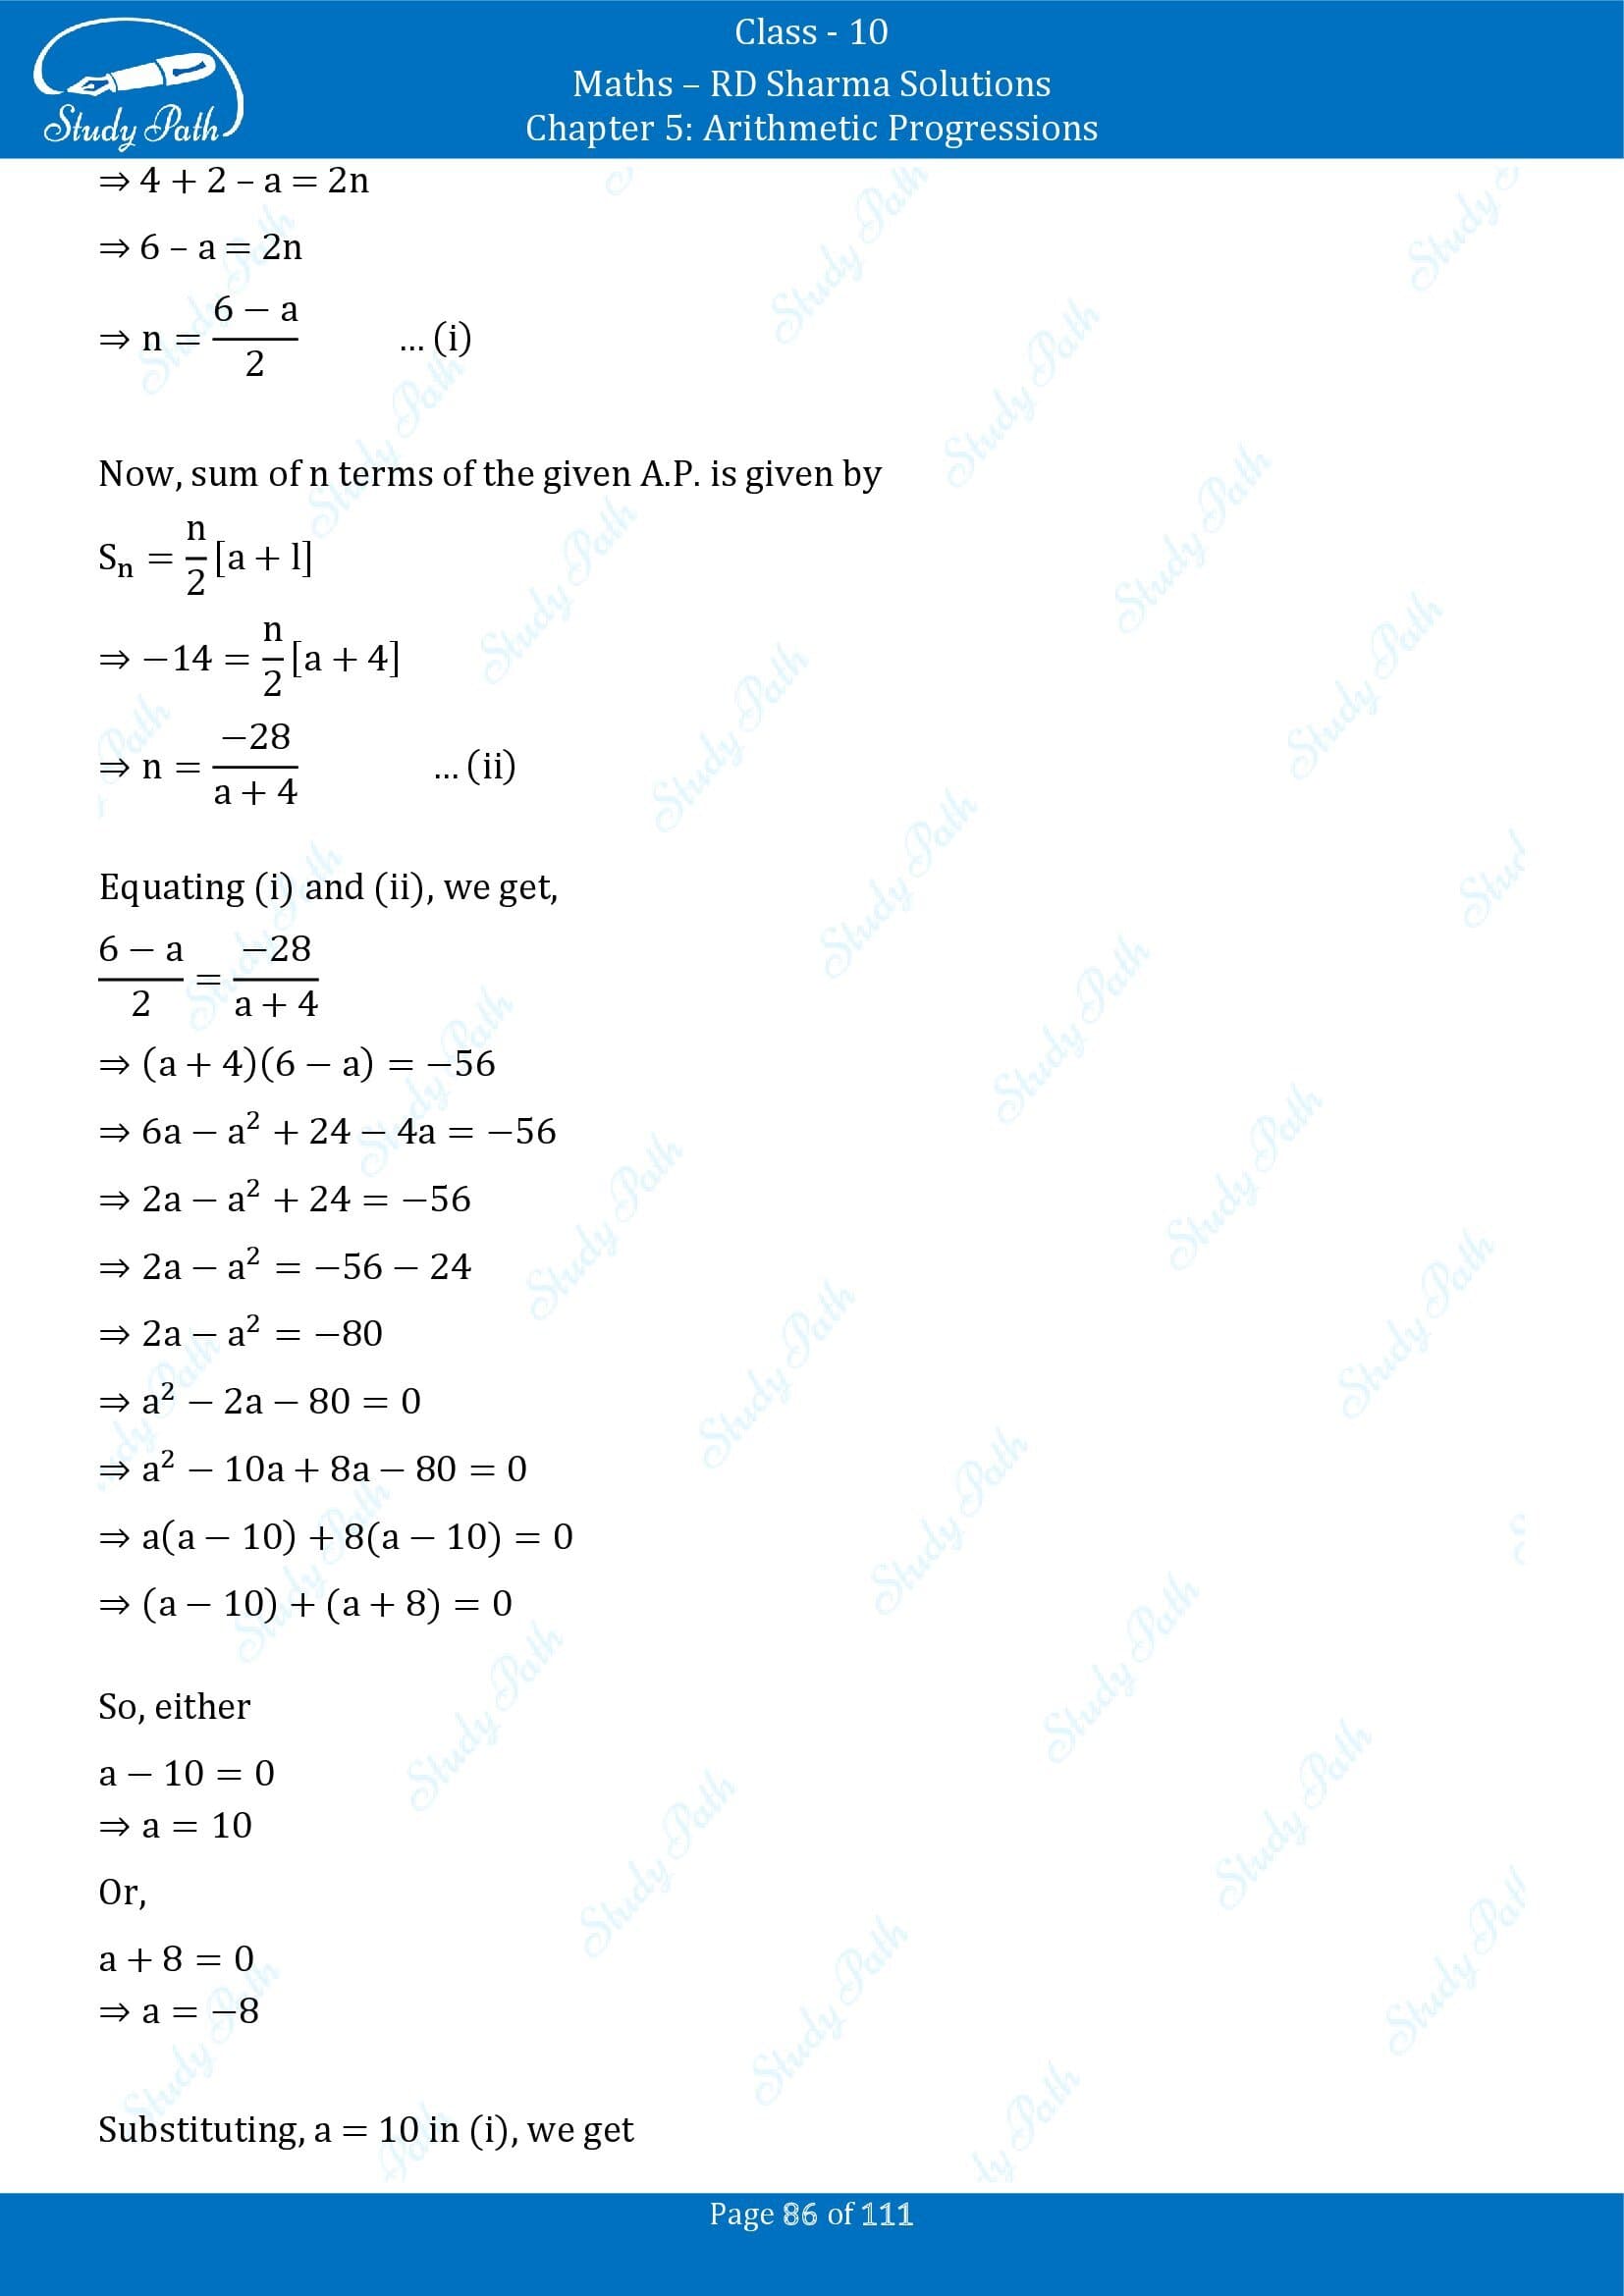 RD Sharma Solutions Class 10 Chapter 5 Arithmetic Progressions Exercise 5.6 00086